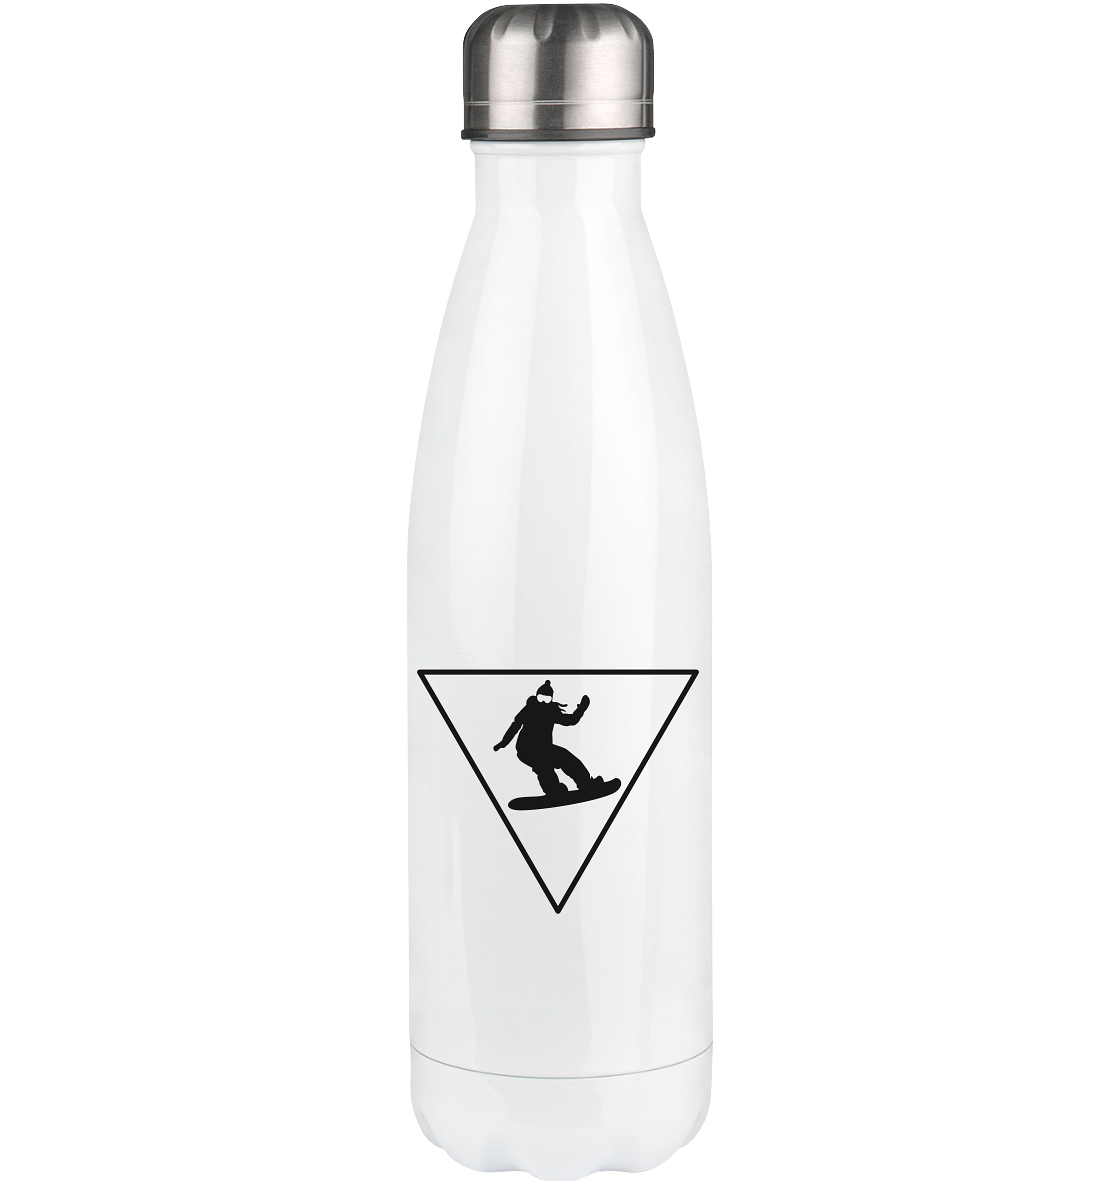 Triangle and Snowboarding - Edelstahl Thermosflasche snowboarden 500ml